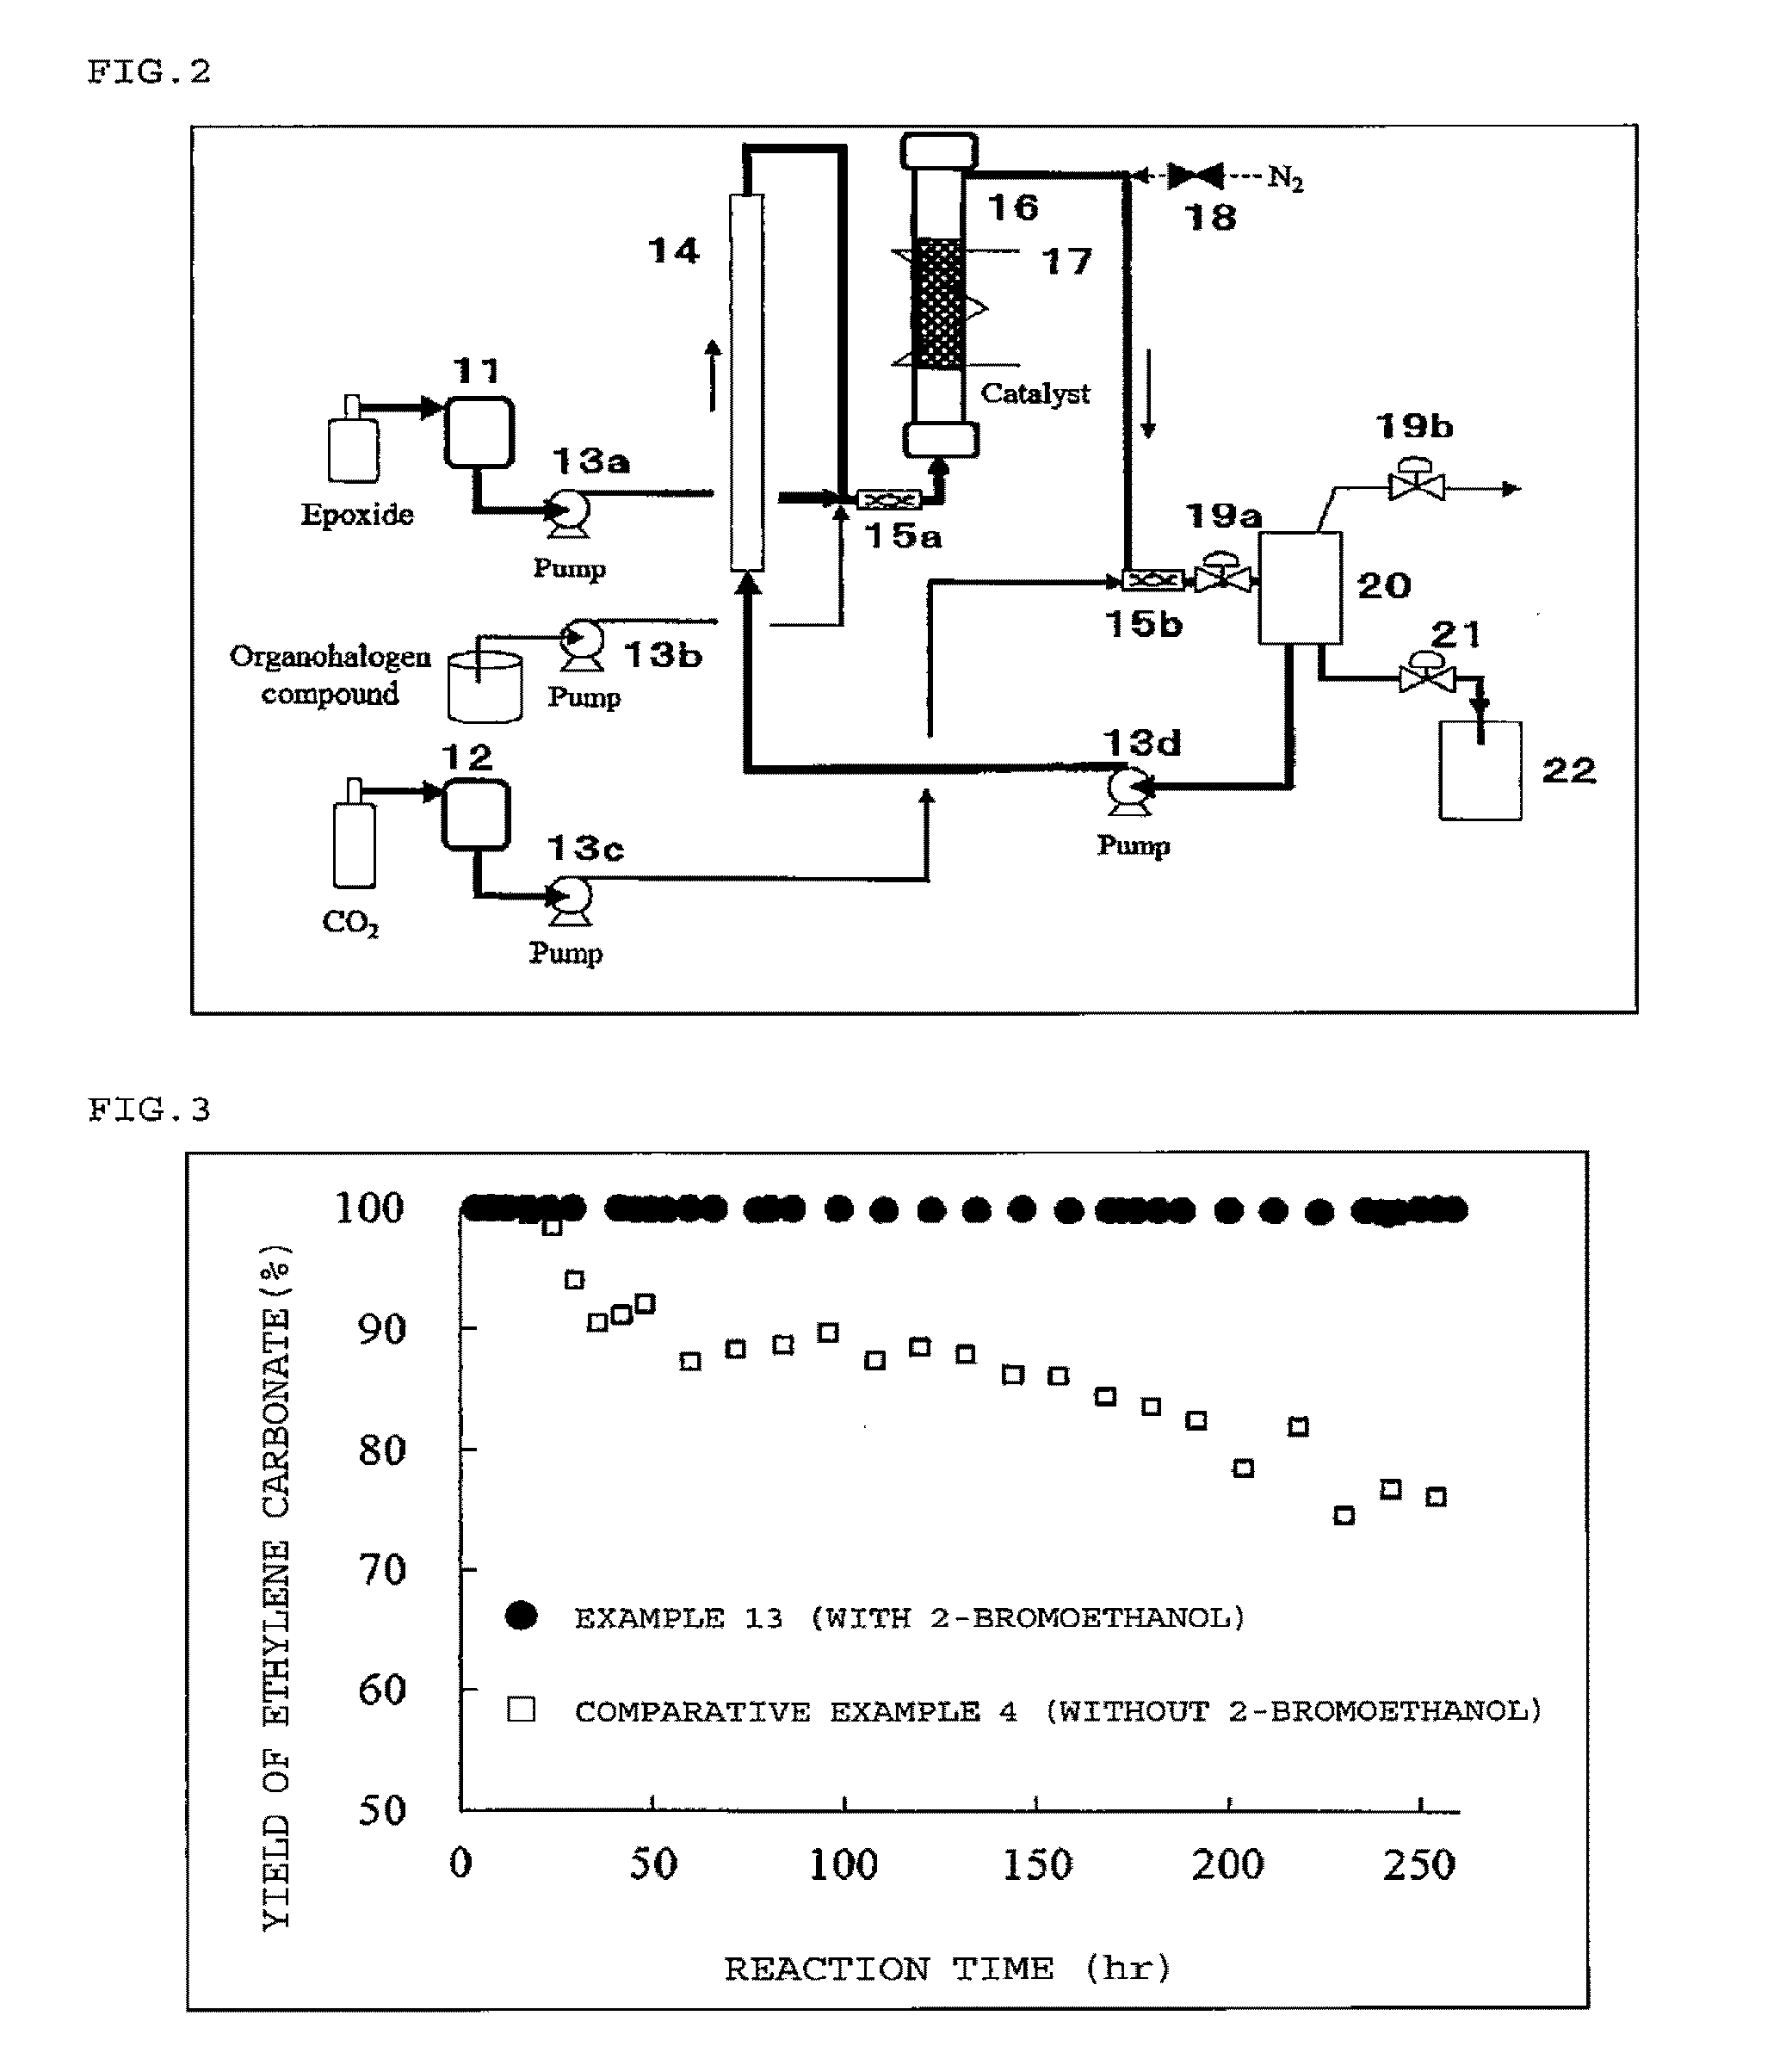 Method for producing cyclic carbonate